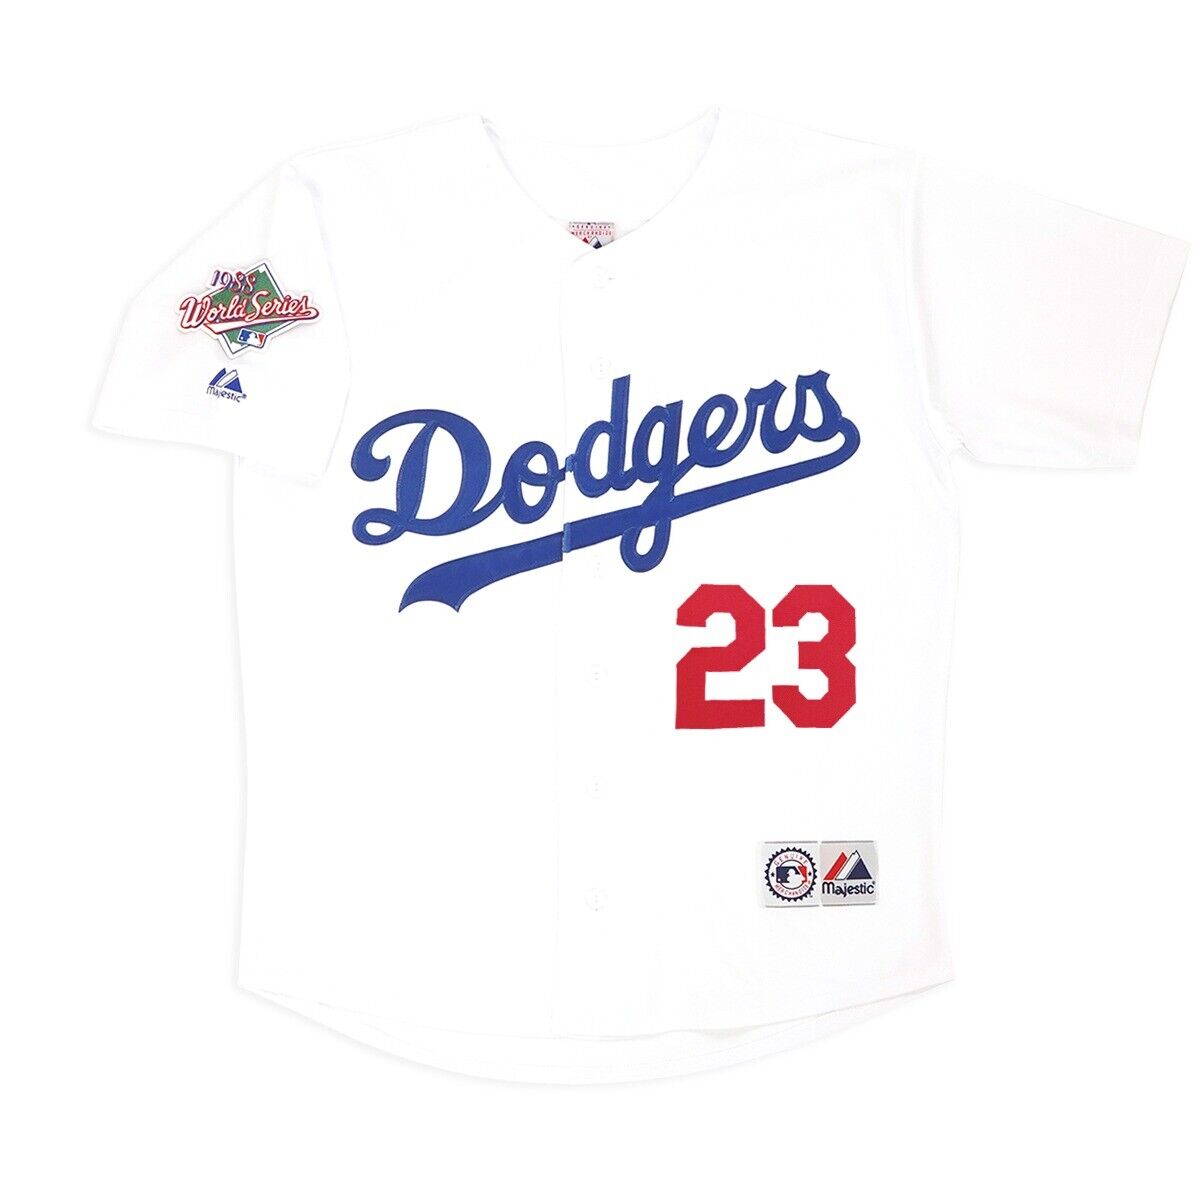 gibson dodgers jersey